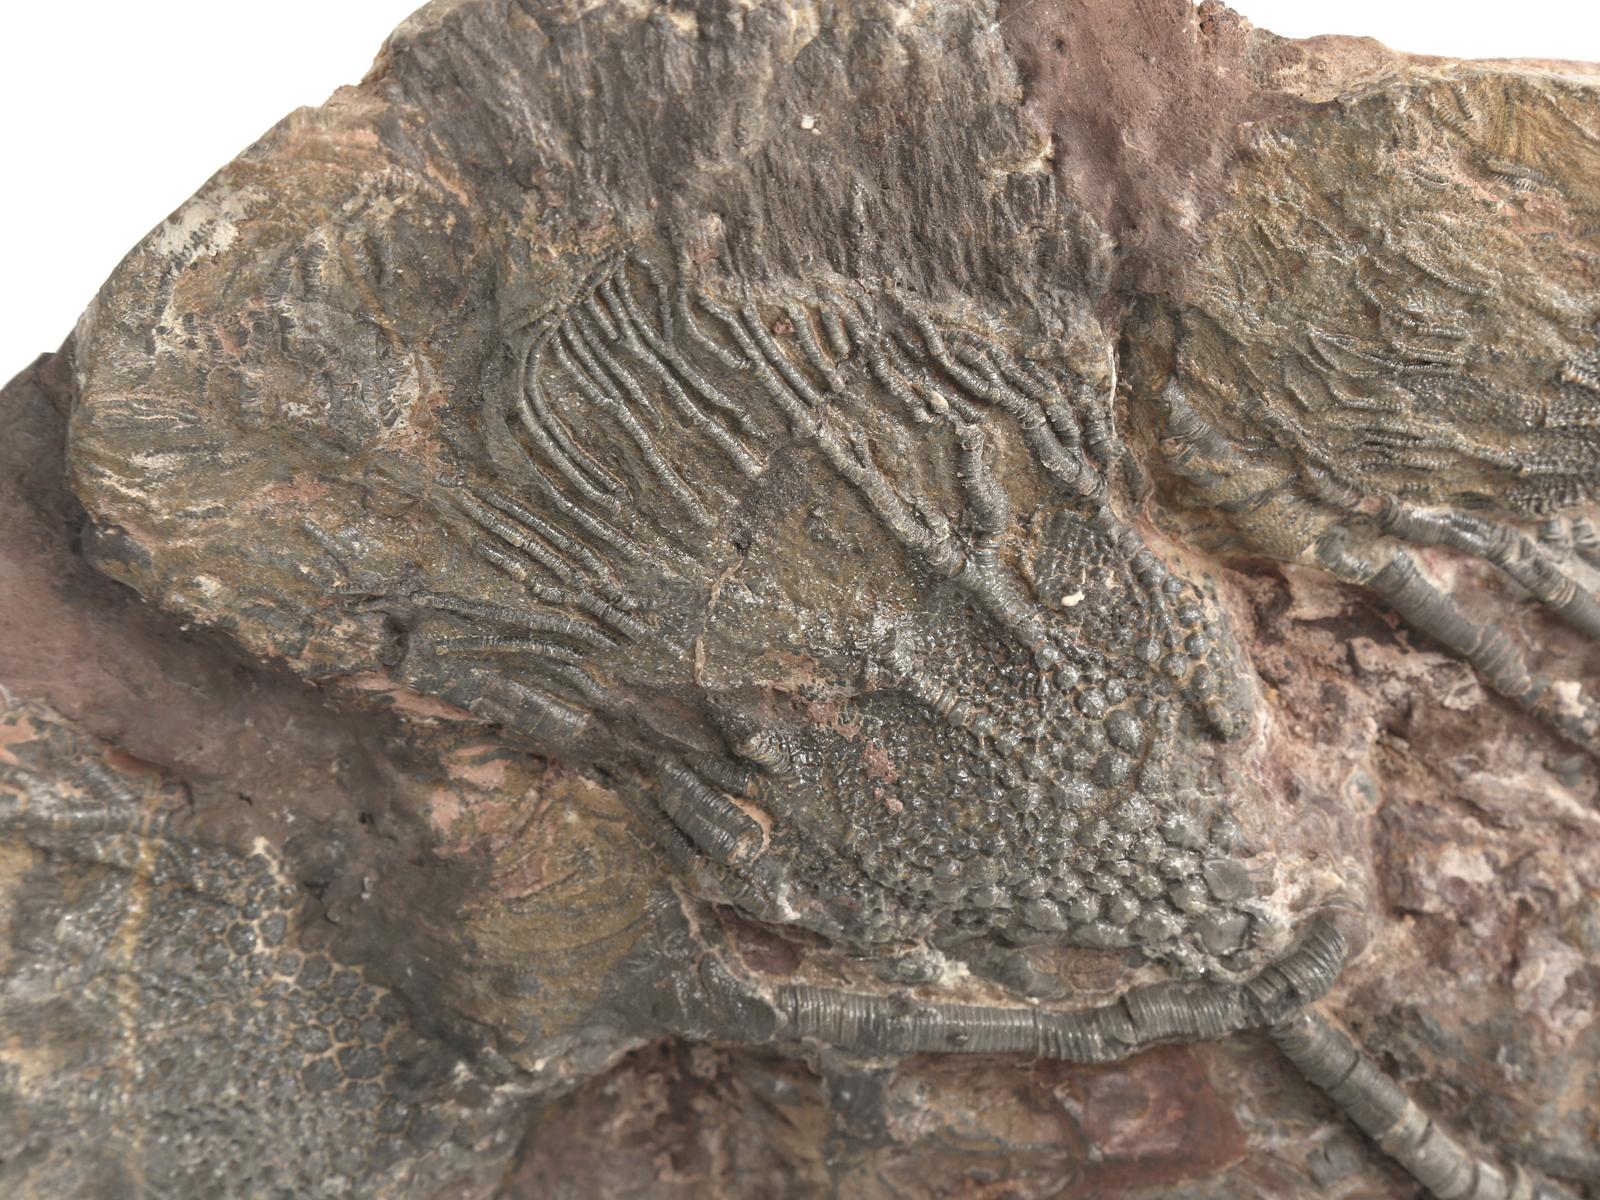 Moroccan Scyhocrinus Elegans or Crinoid Fossil from Morocco 450 Million Years Old